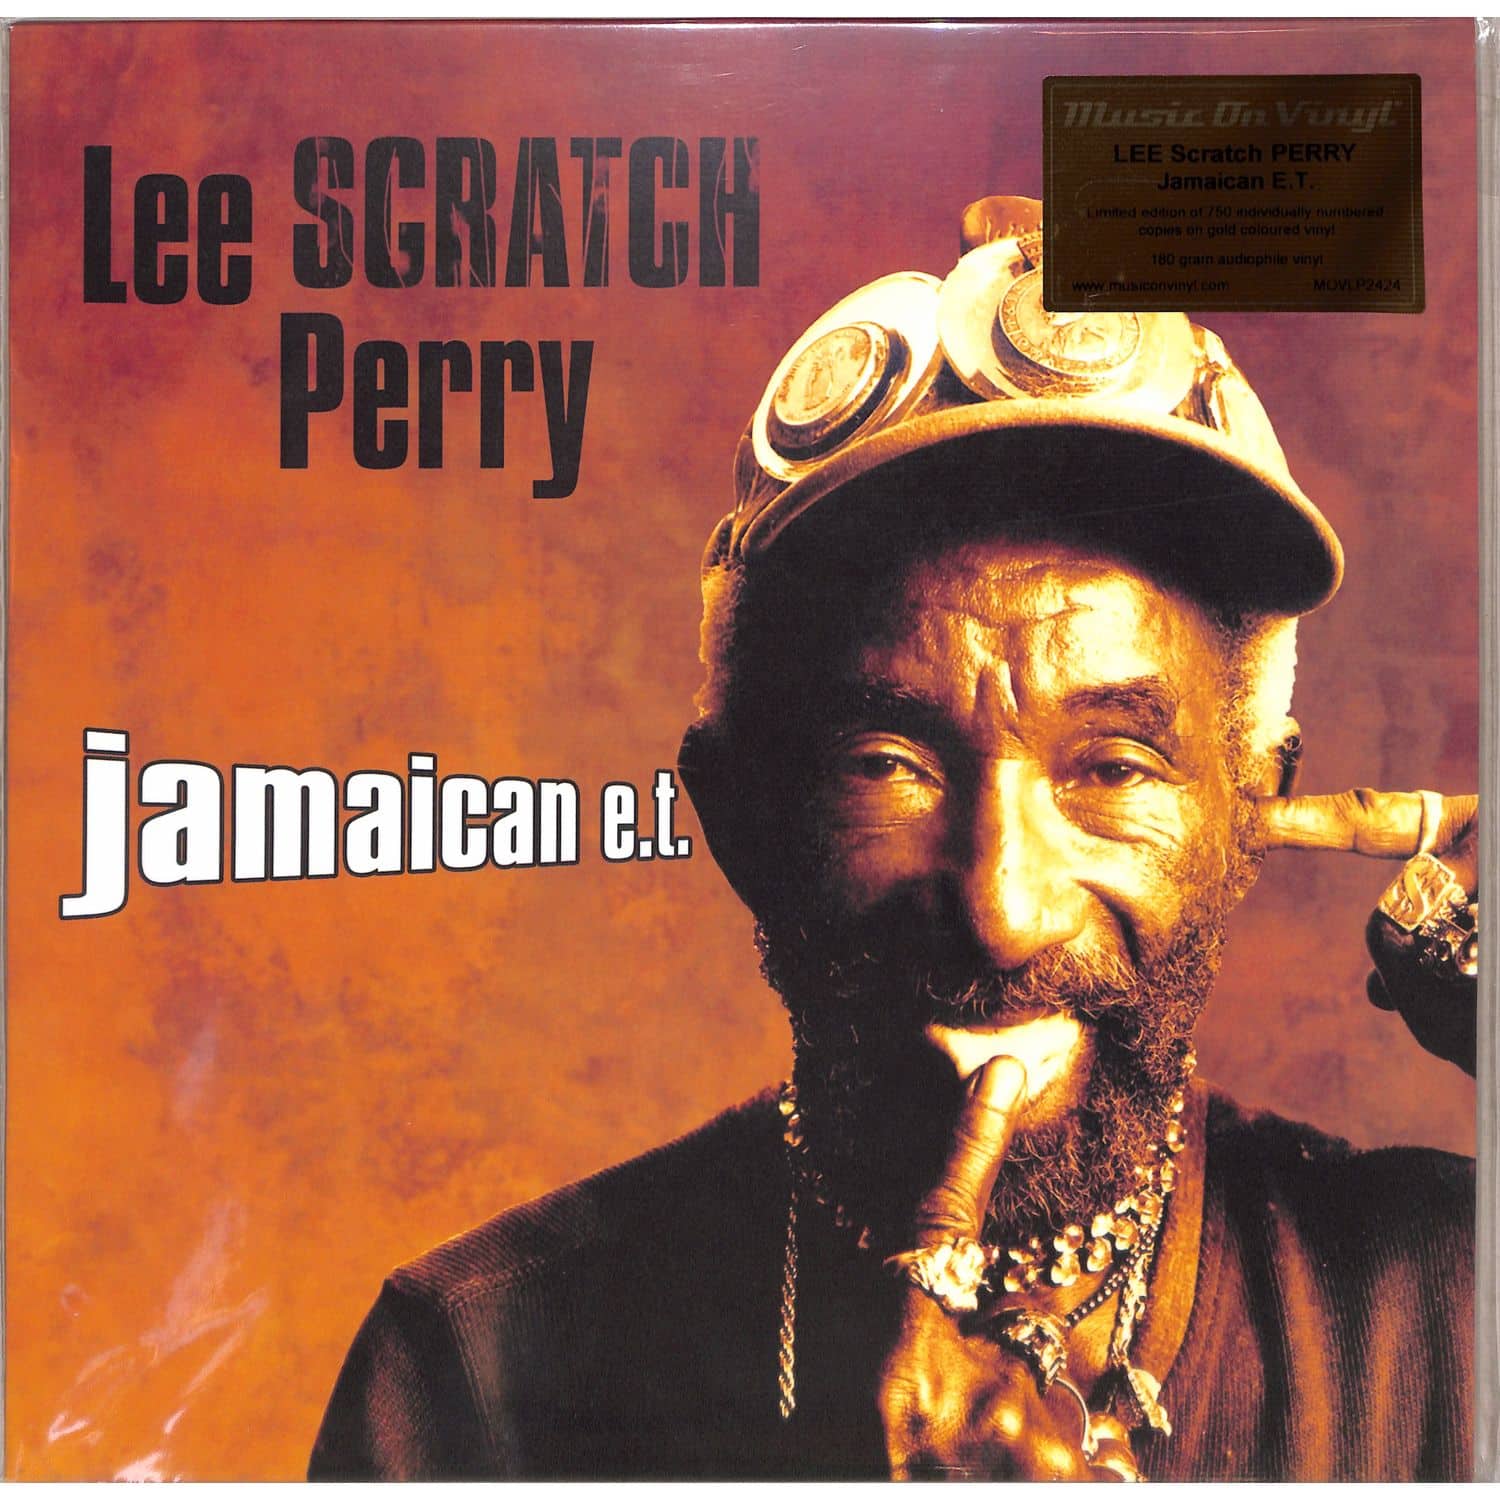 Lee-Scratch- Perry - JAMAICAN E.T. 